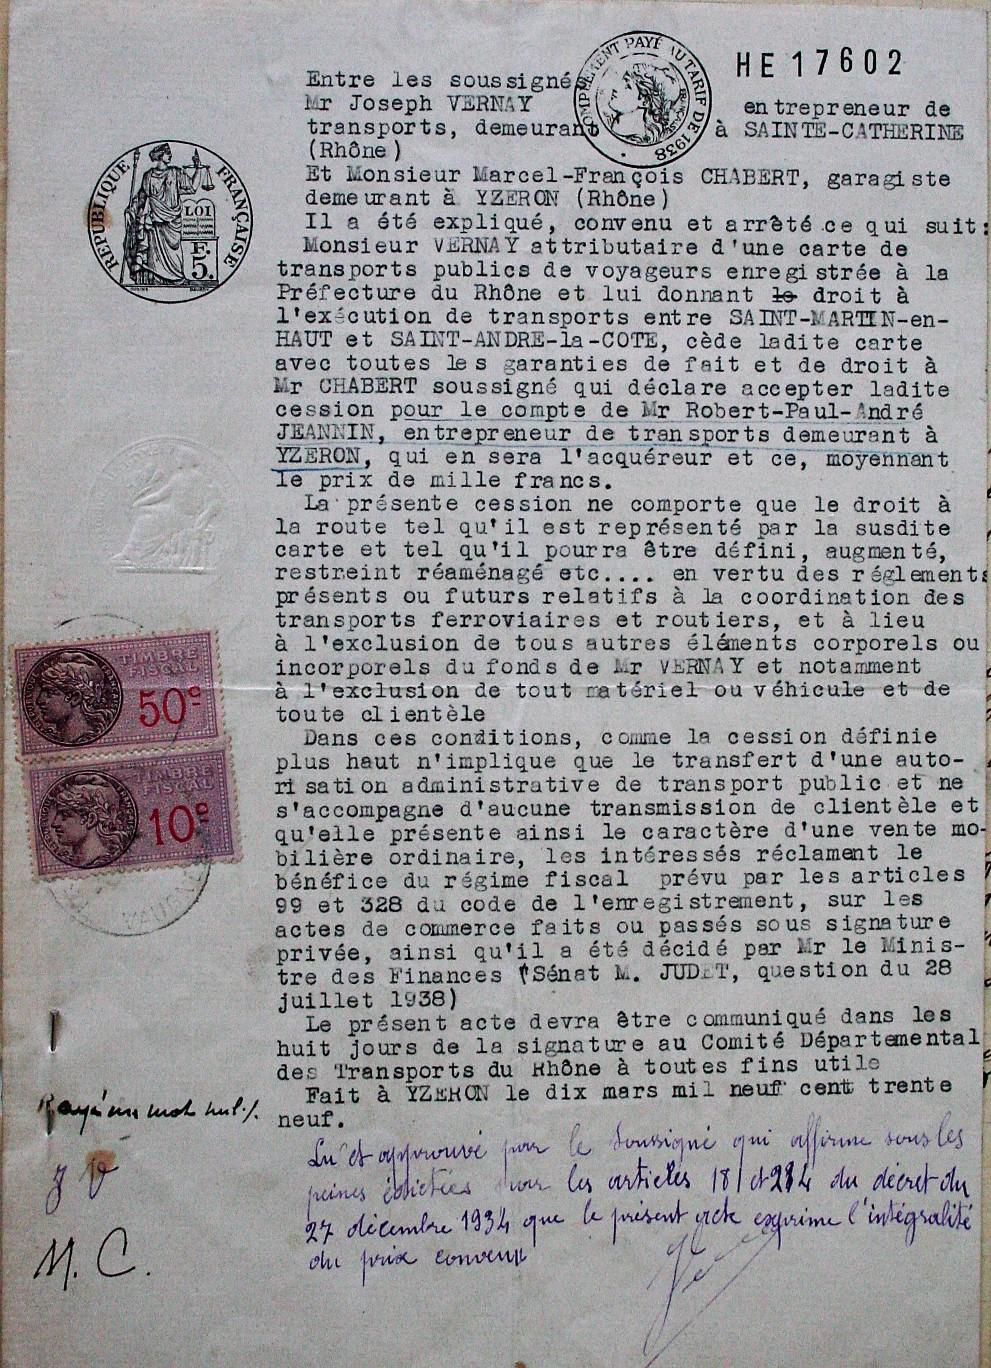 1939 sale contract